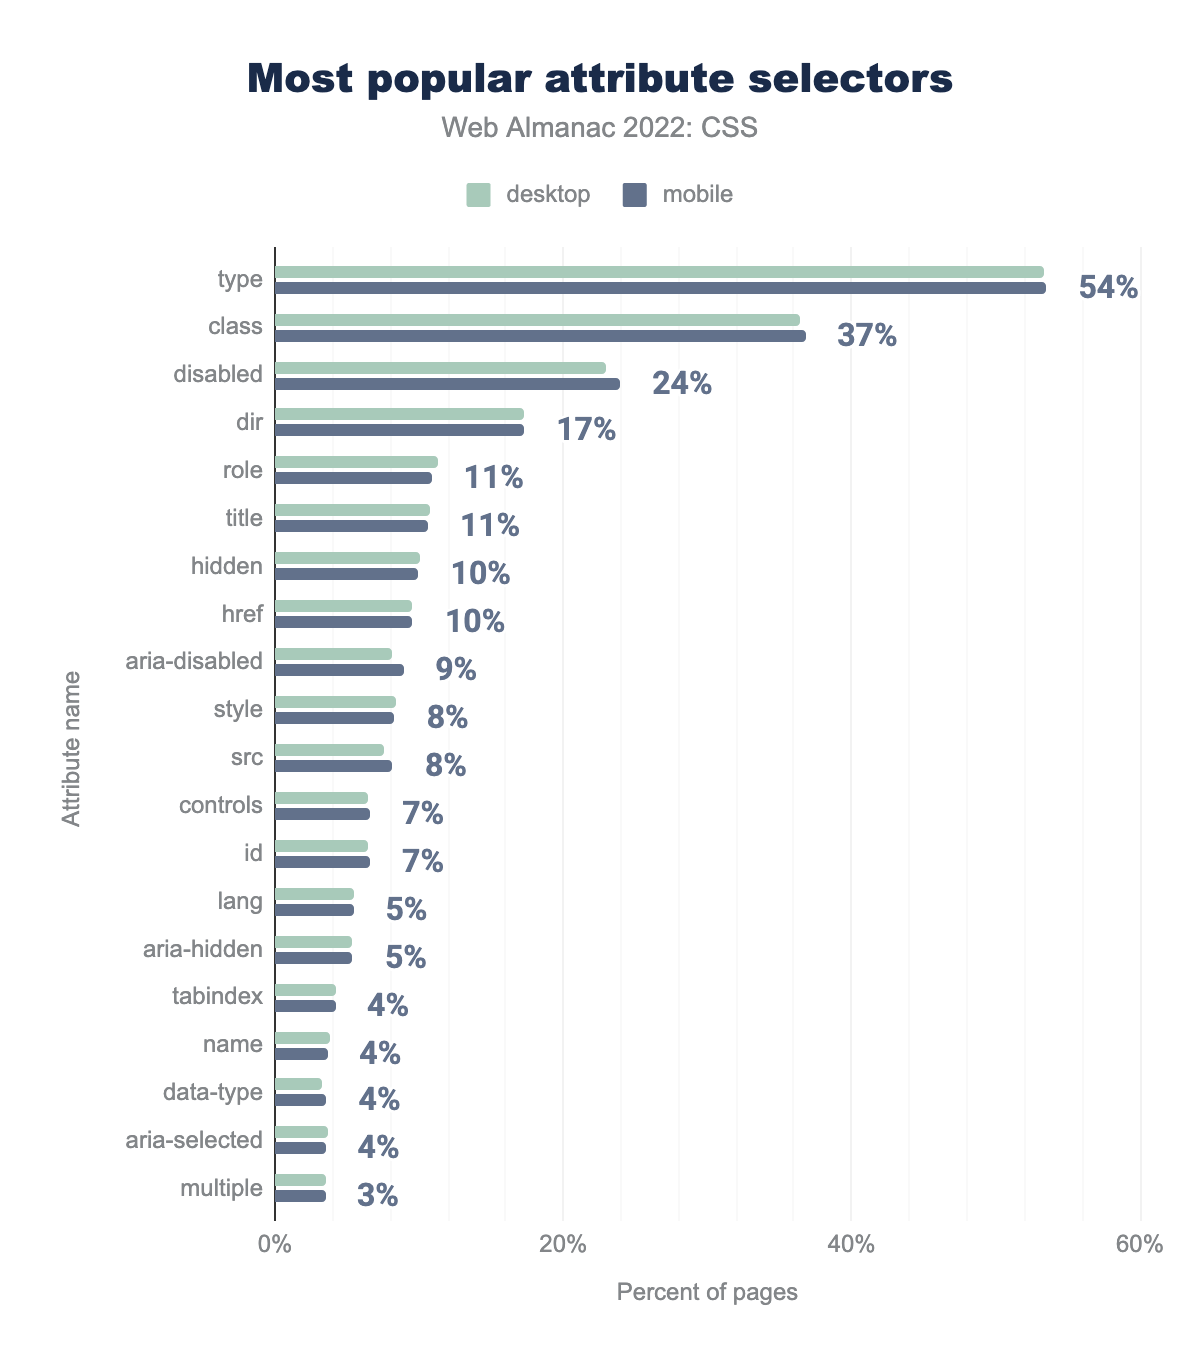 Most popular attribute selectors by percent of pages.